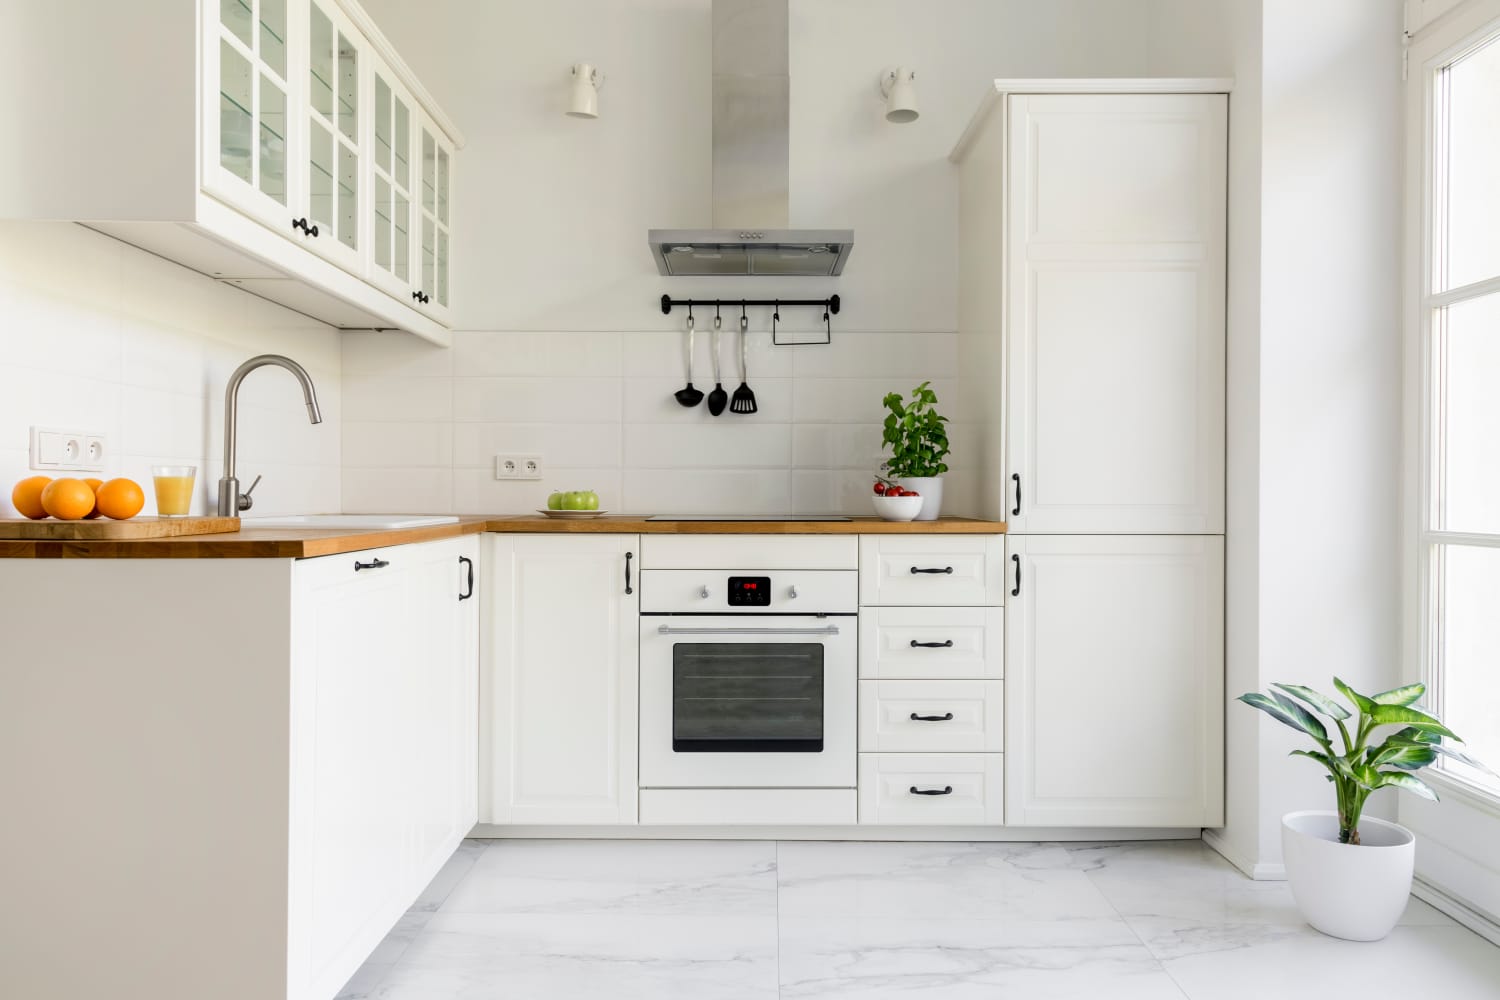 Bad Kitchen Trends That Don't Add Value To Your Home   Apartment ...